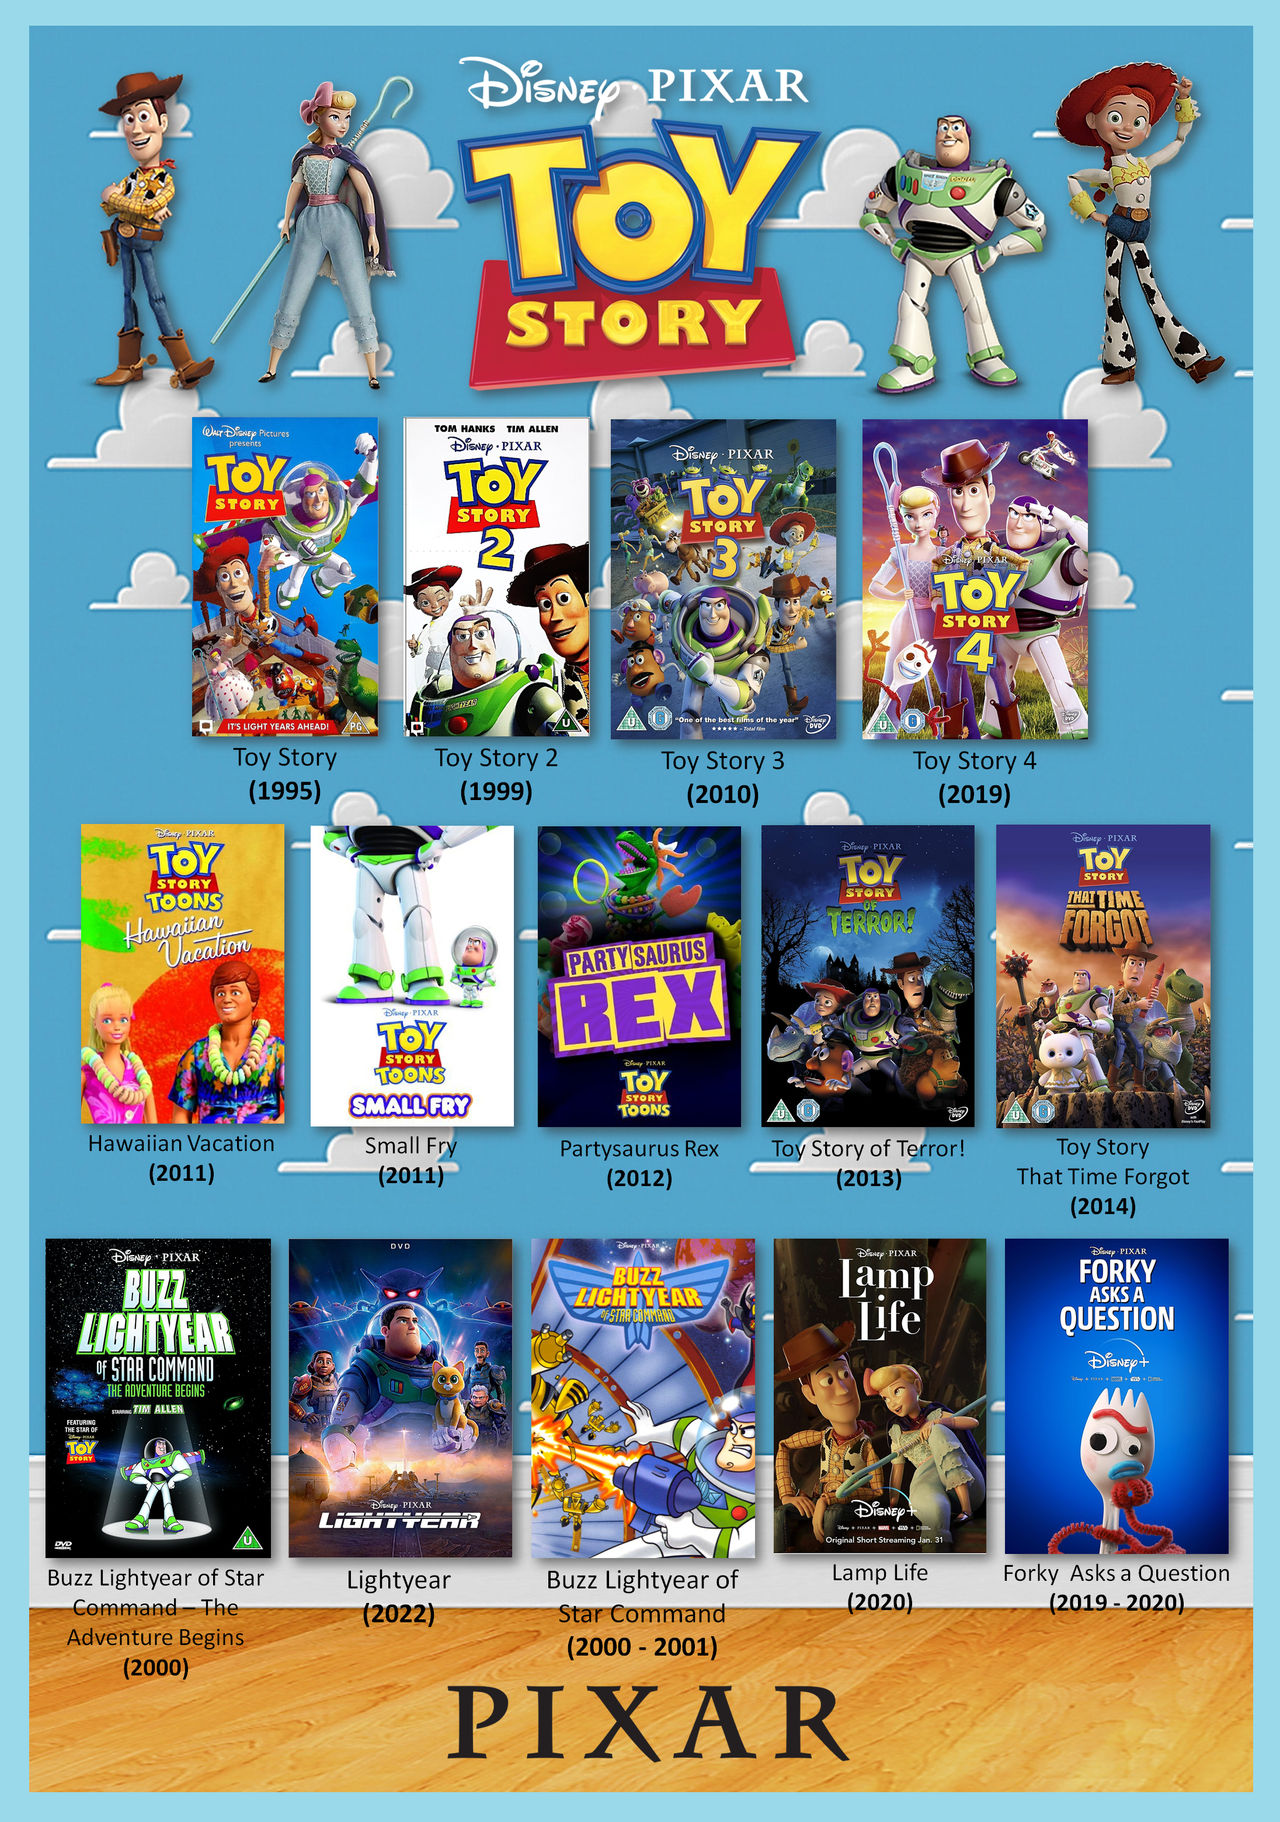 Toy Story franchises by gikesmanners1995 on DeviantArt